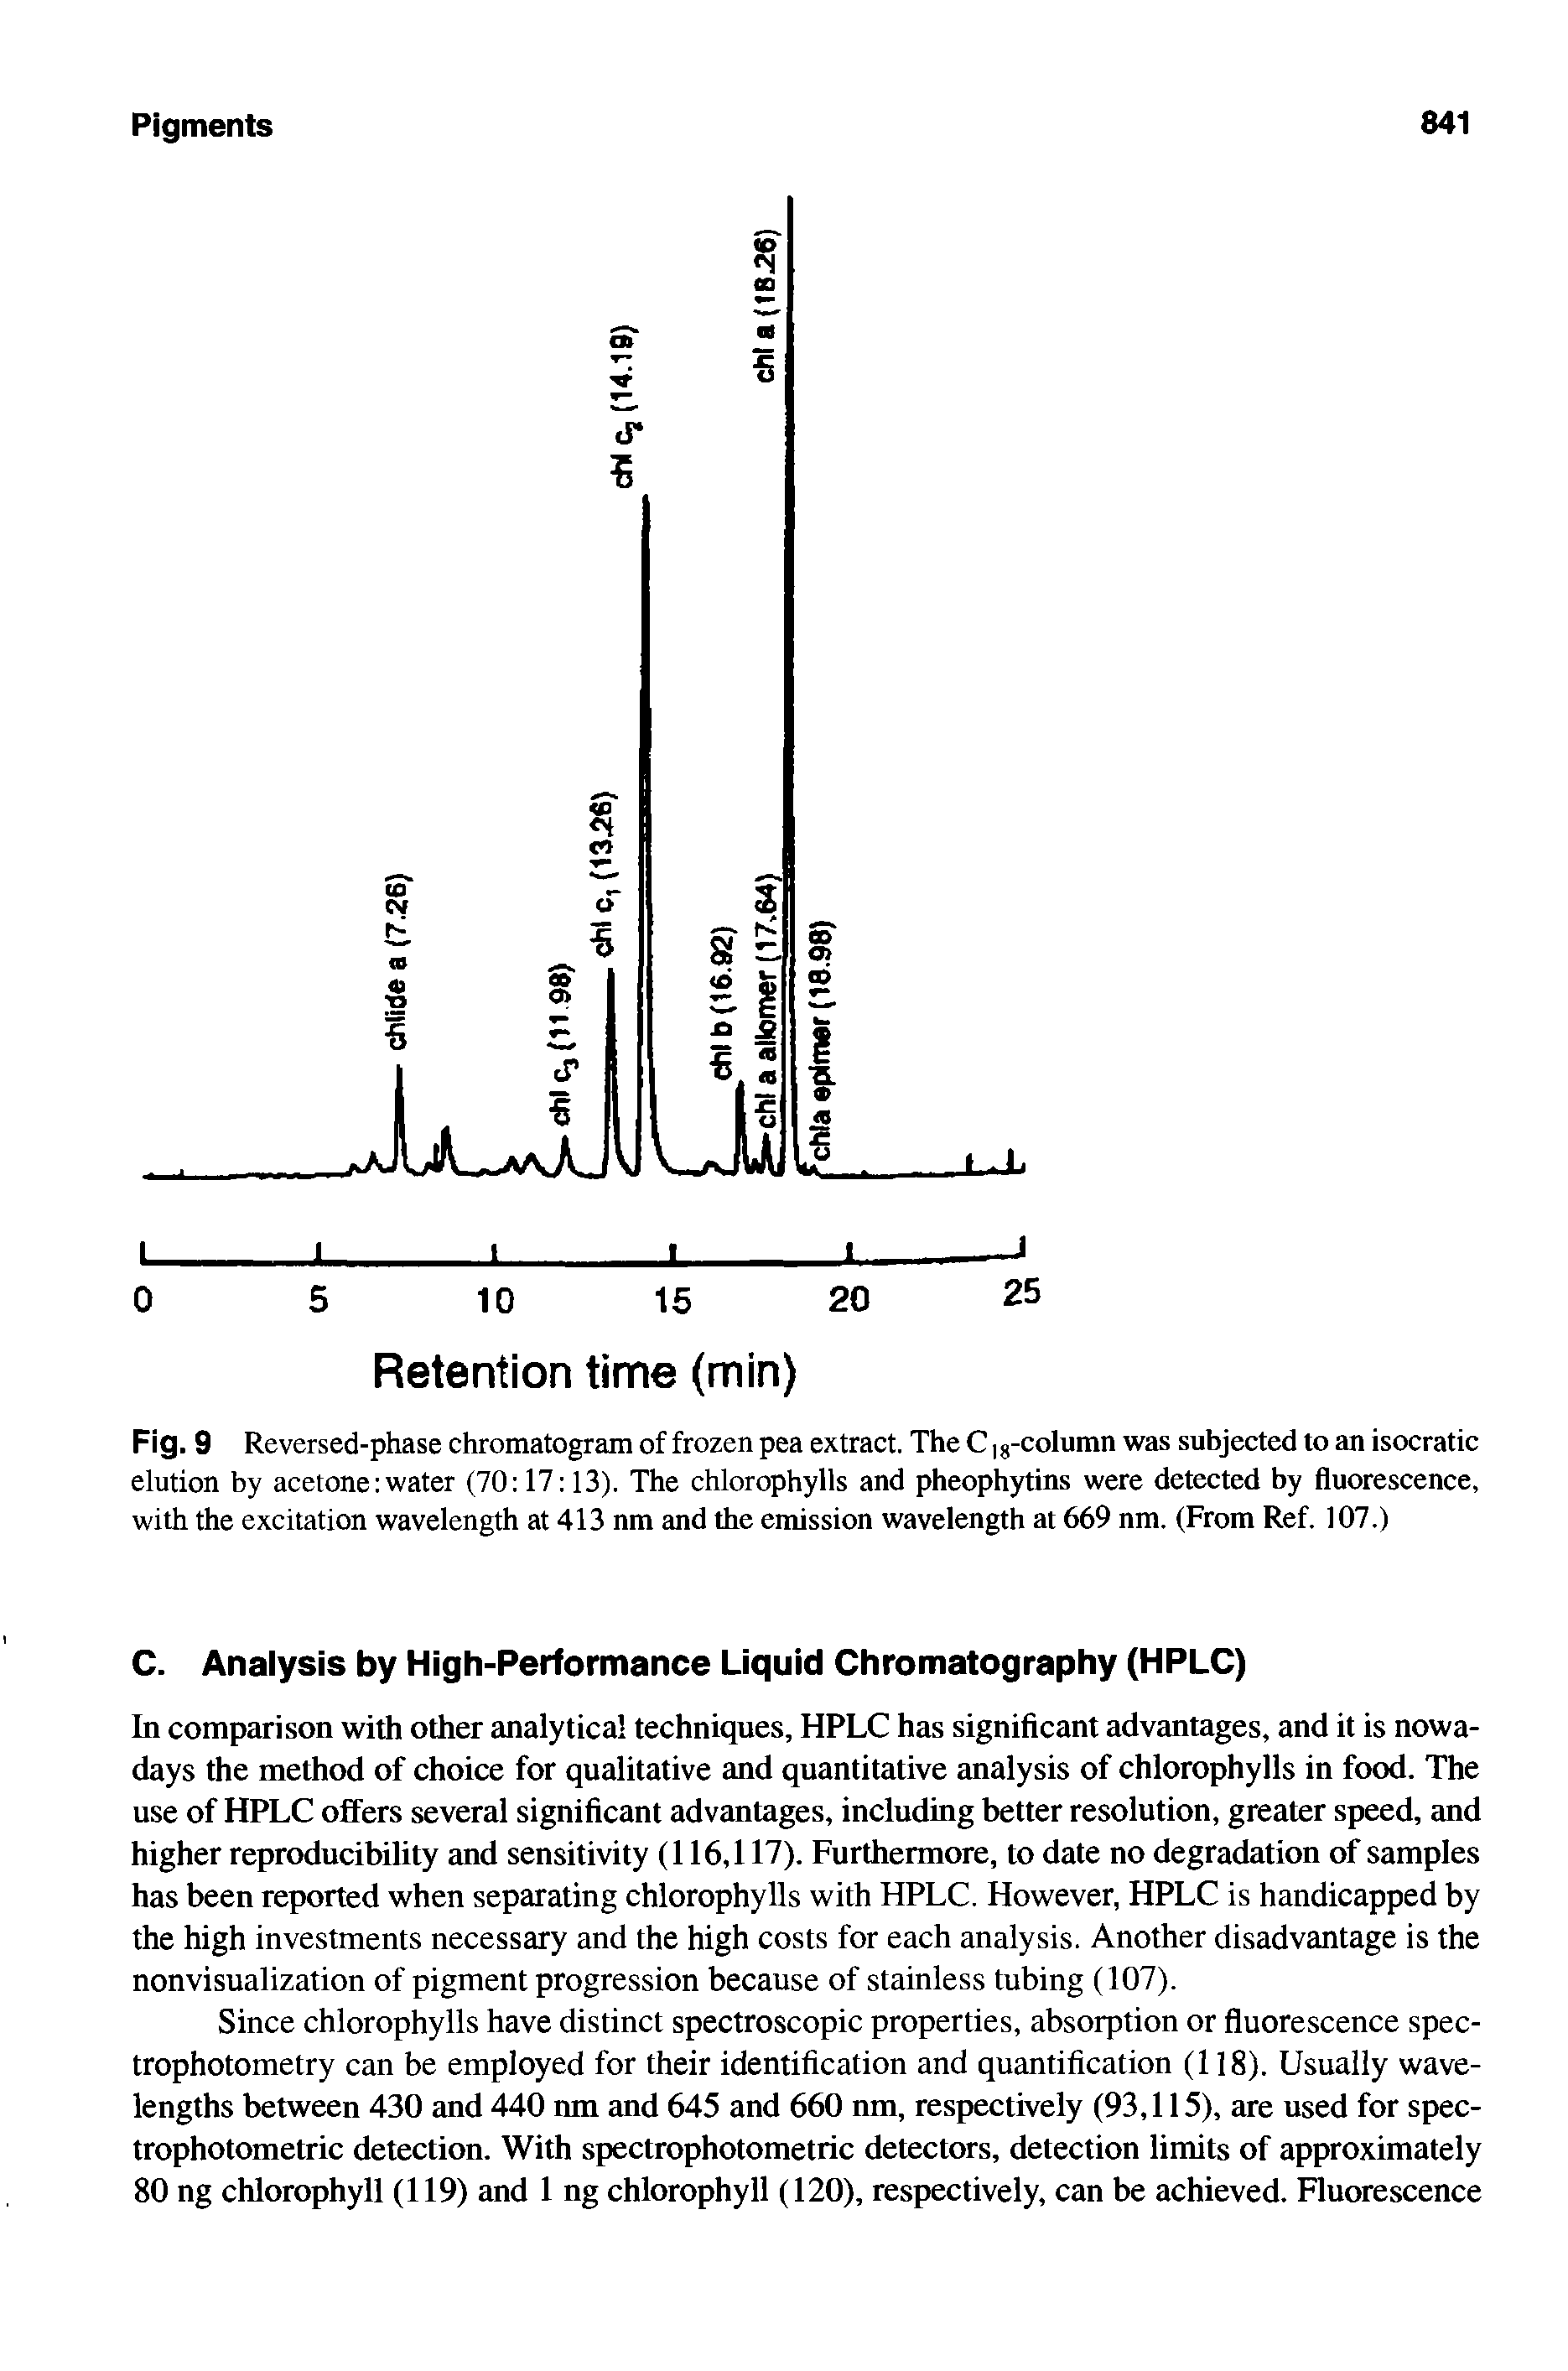 Fig. 9 Reversed-phase chromatogram of frozen pea extract. The C, 8-column was subjected to an isocratic elution by acetone water (70 17 13). The chlorophylls and pheophytins were detected by fluorescence, with the excitation wavelength at 413 nm and the emission wavelength at 669 nm. (From Ref. 107.)...